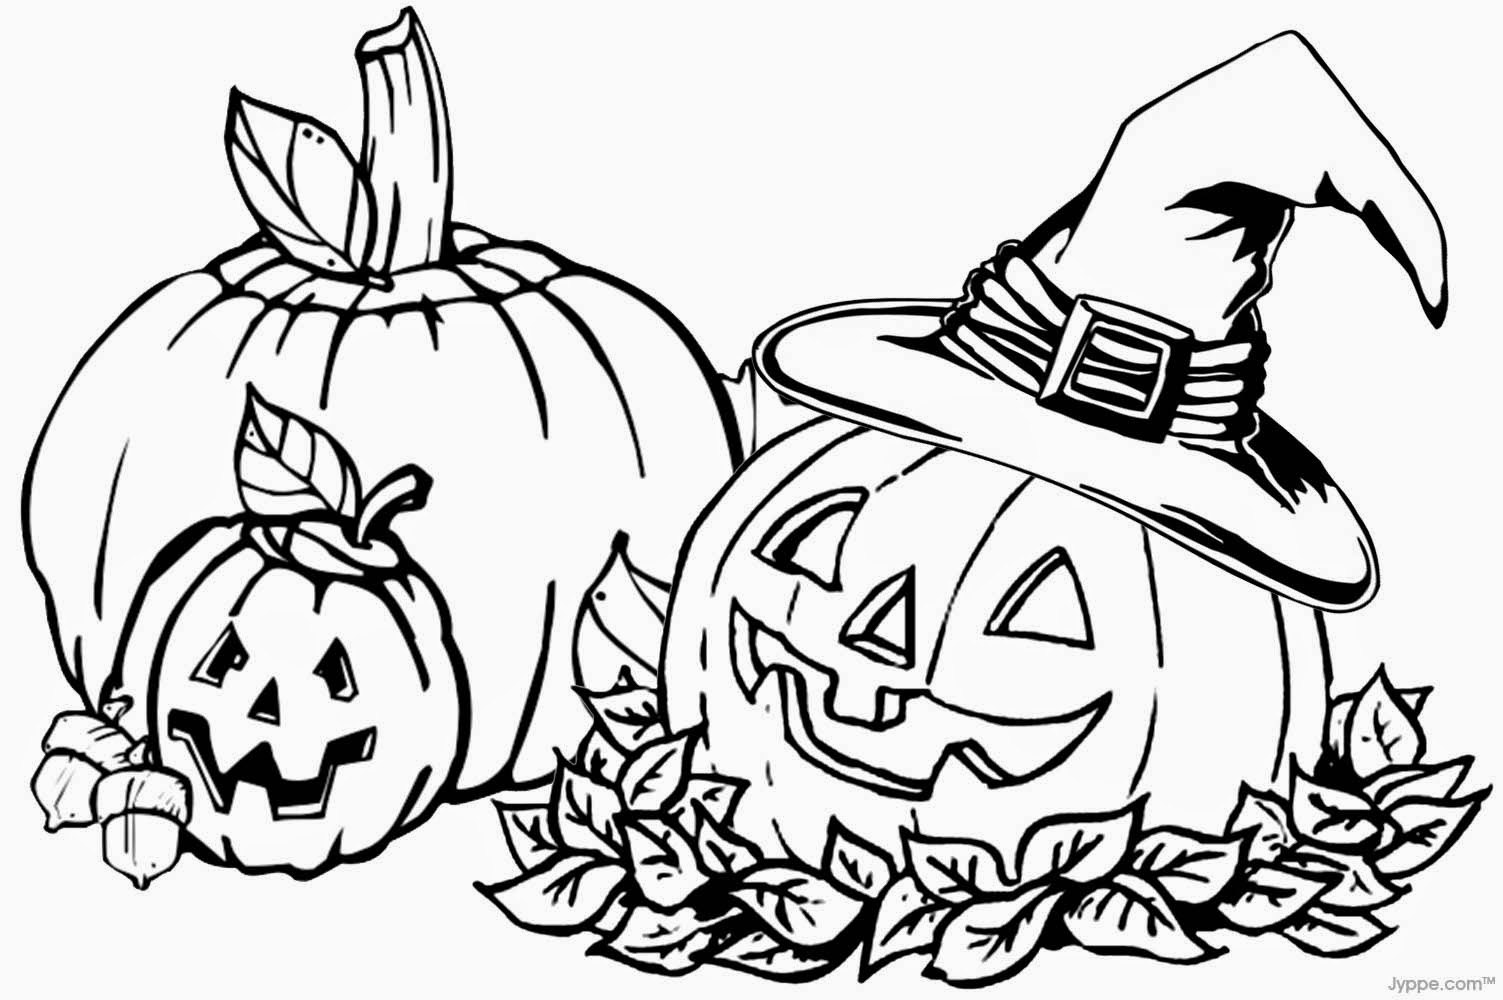 Free Halloween Jack-o'-Lantern Coloring Pages